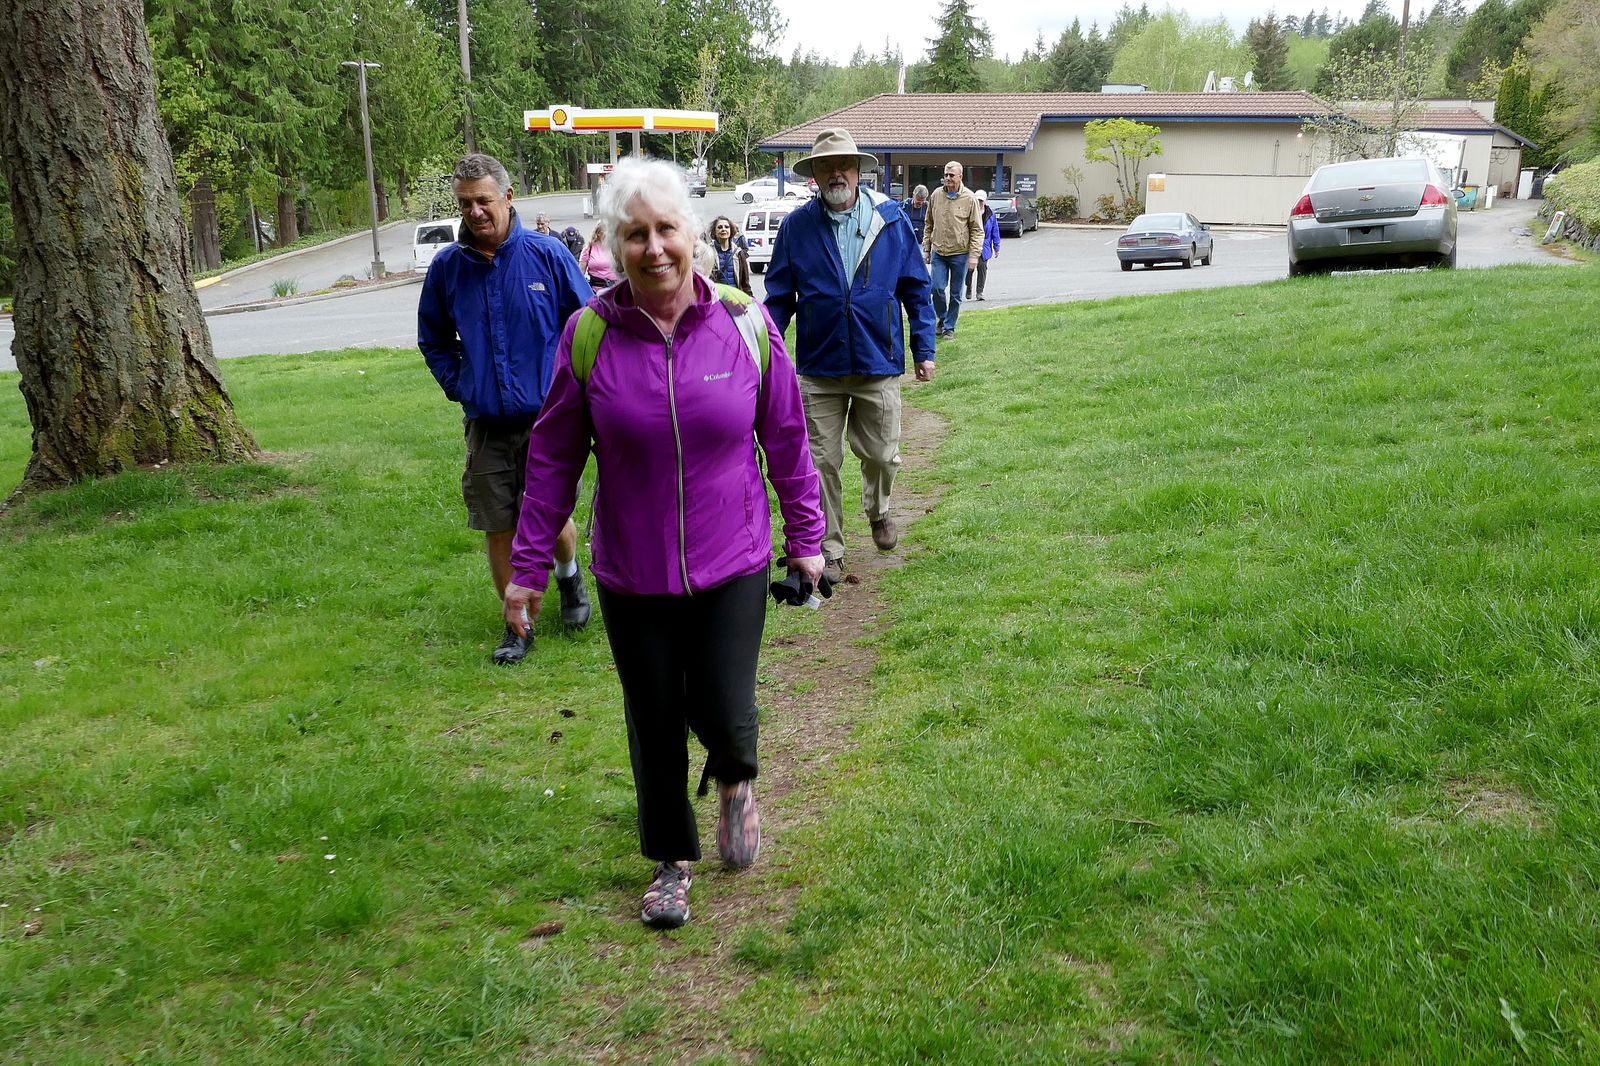  Merrily leads the pack on their way to the Osprey Trail 